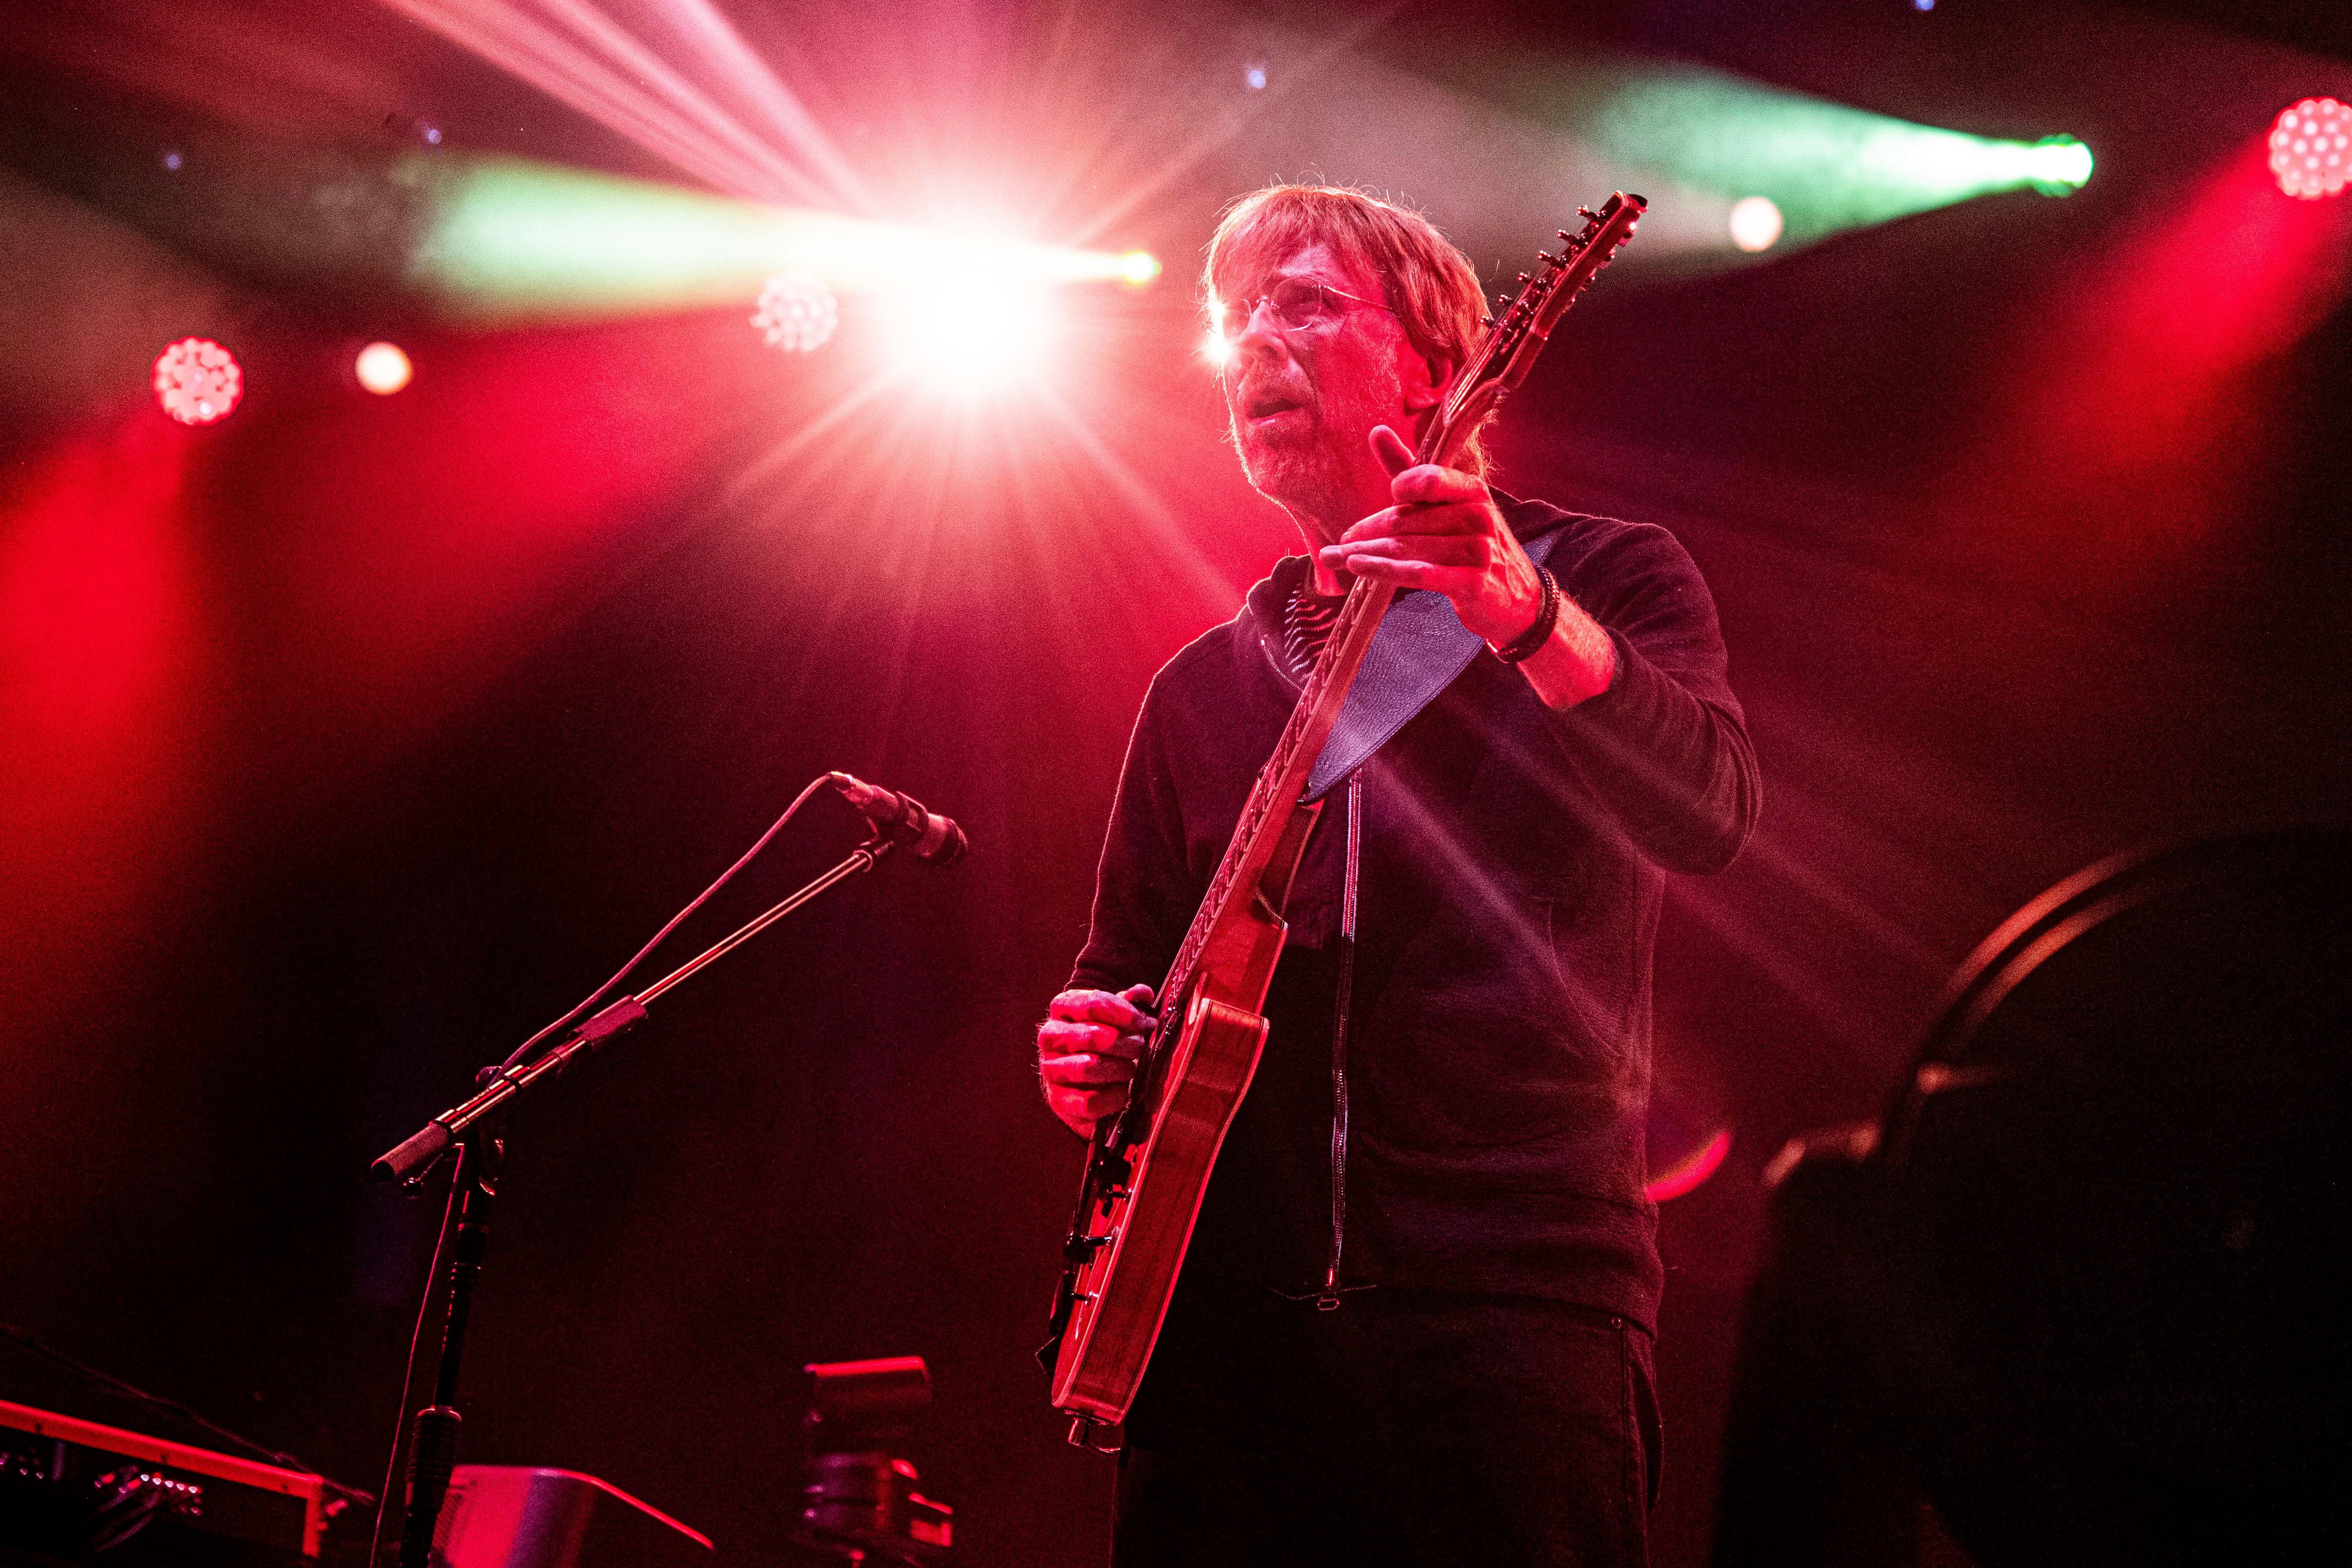 Phish guitarist to found substance abuse treatment center